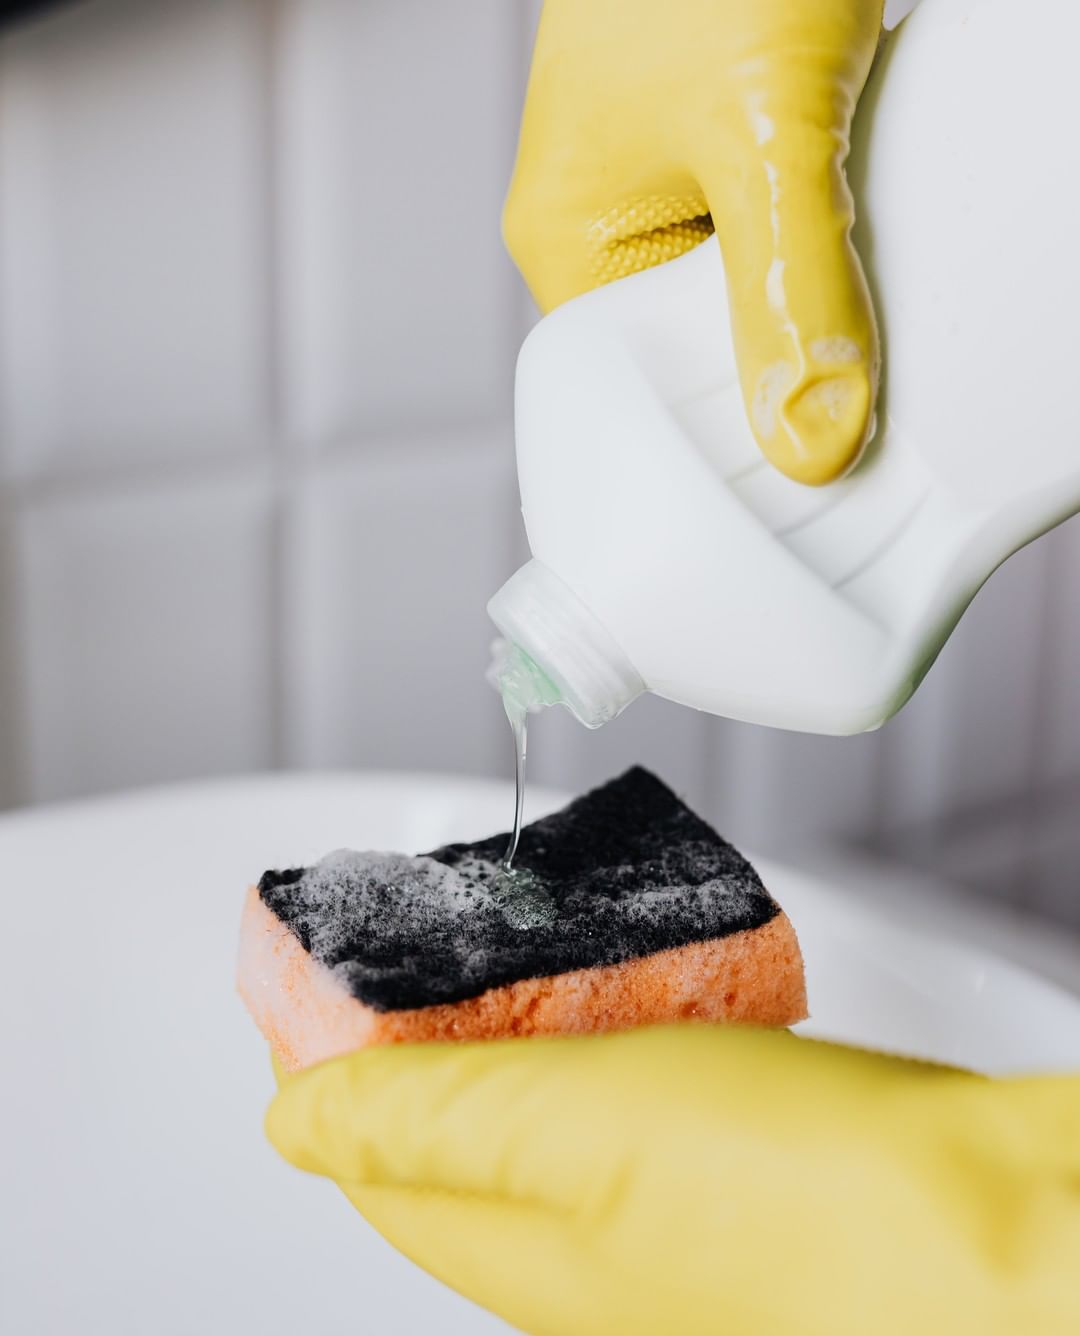 Personal Putting Dish Soap on a Sponge. Photo by Instagram user @theroyalcleaningco